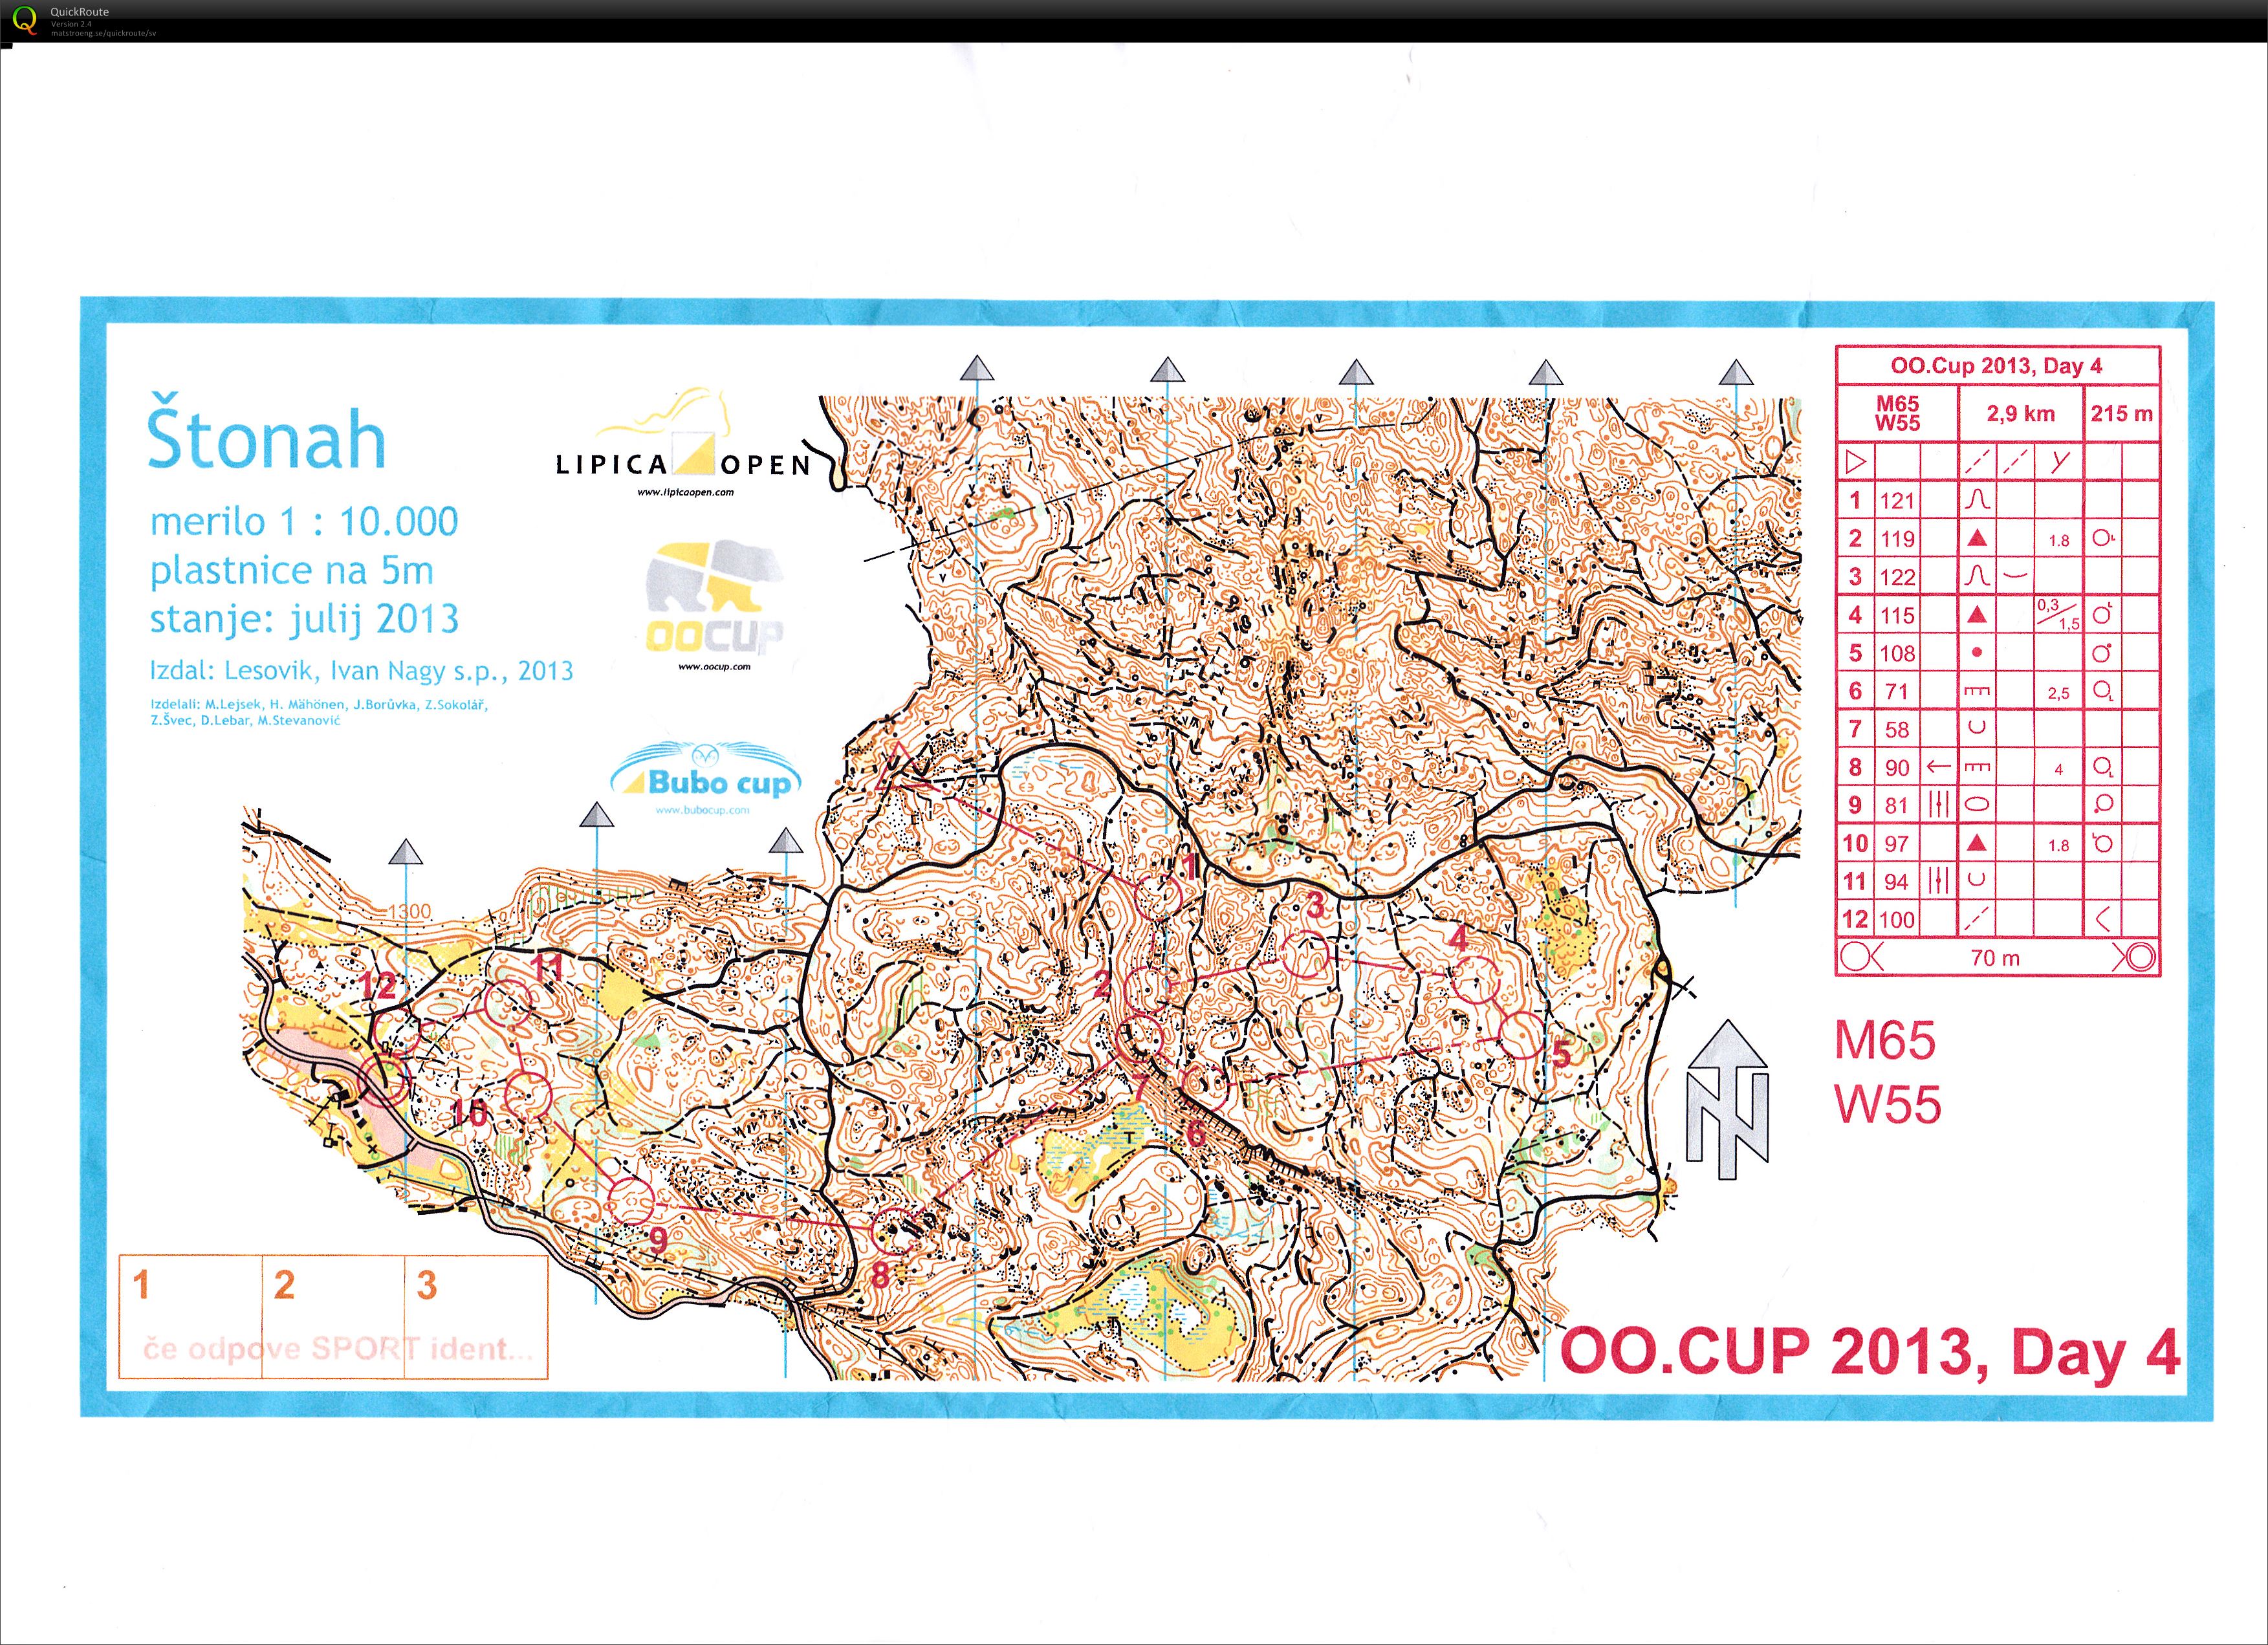 OOCup 2013 Stage 4 (29-07-2013)